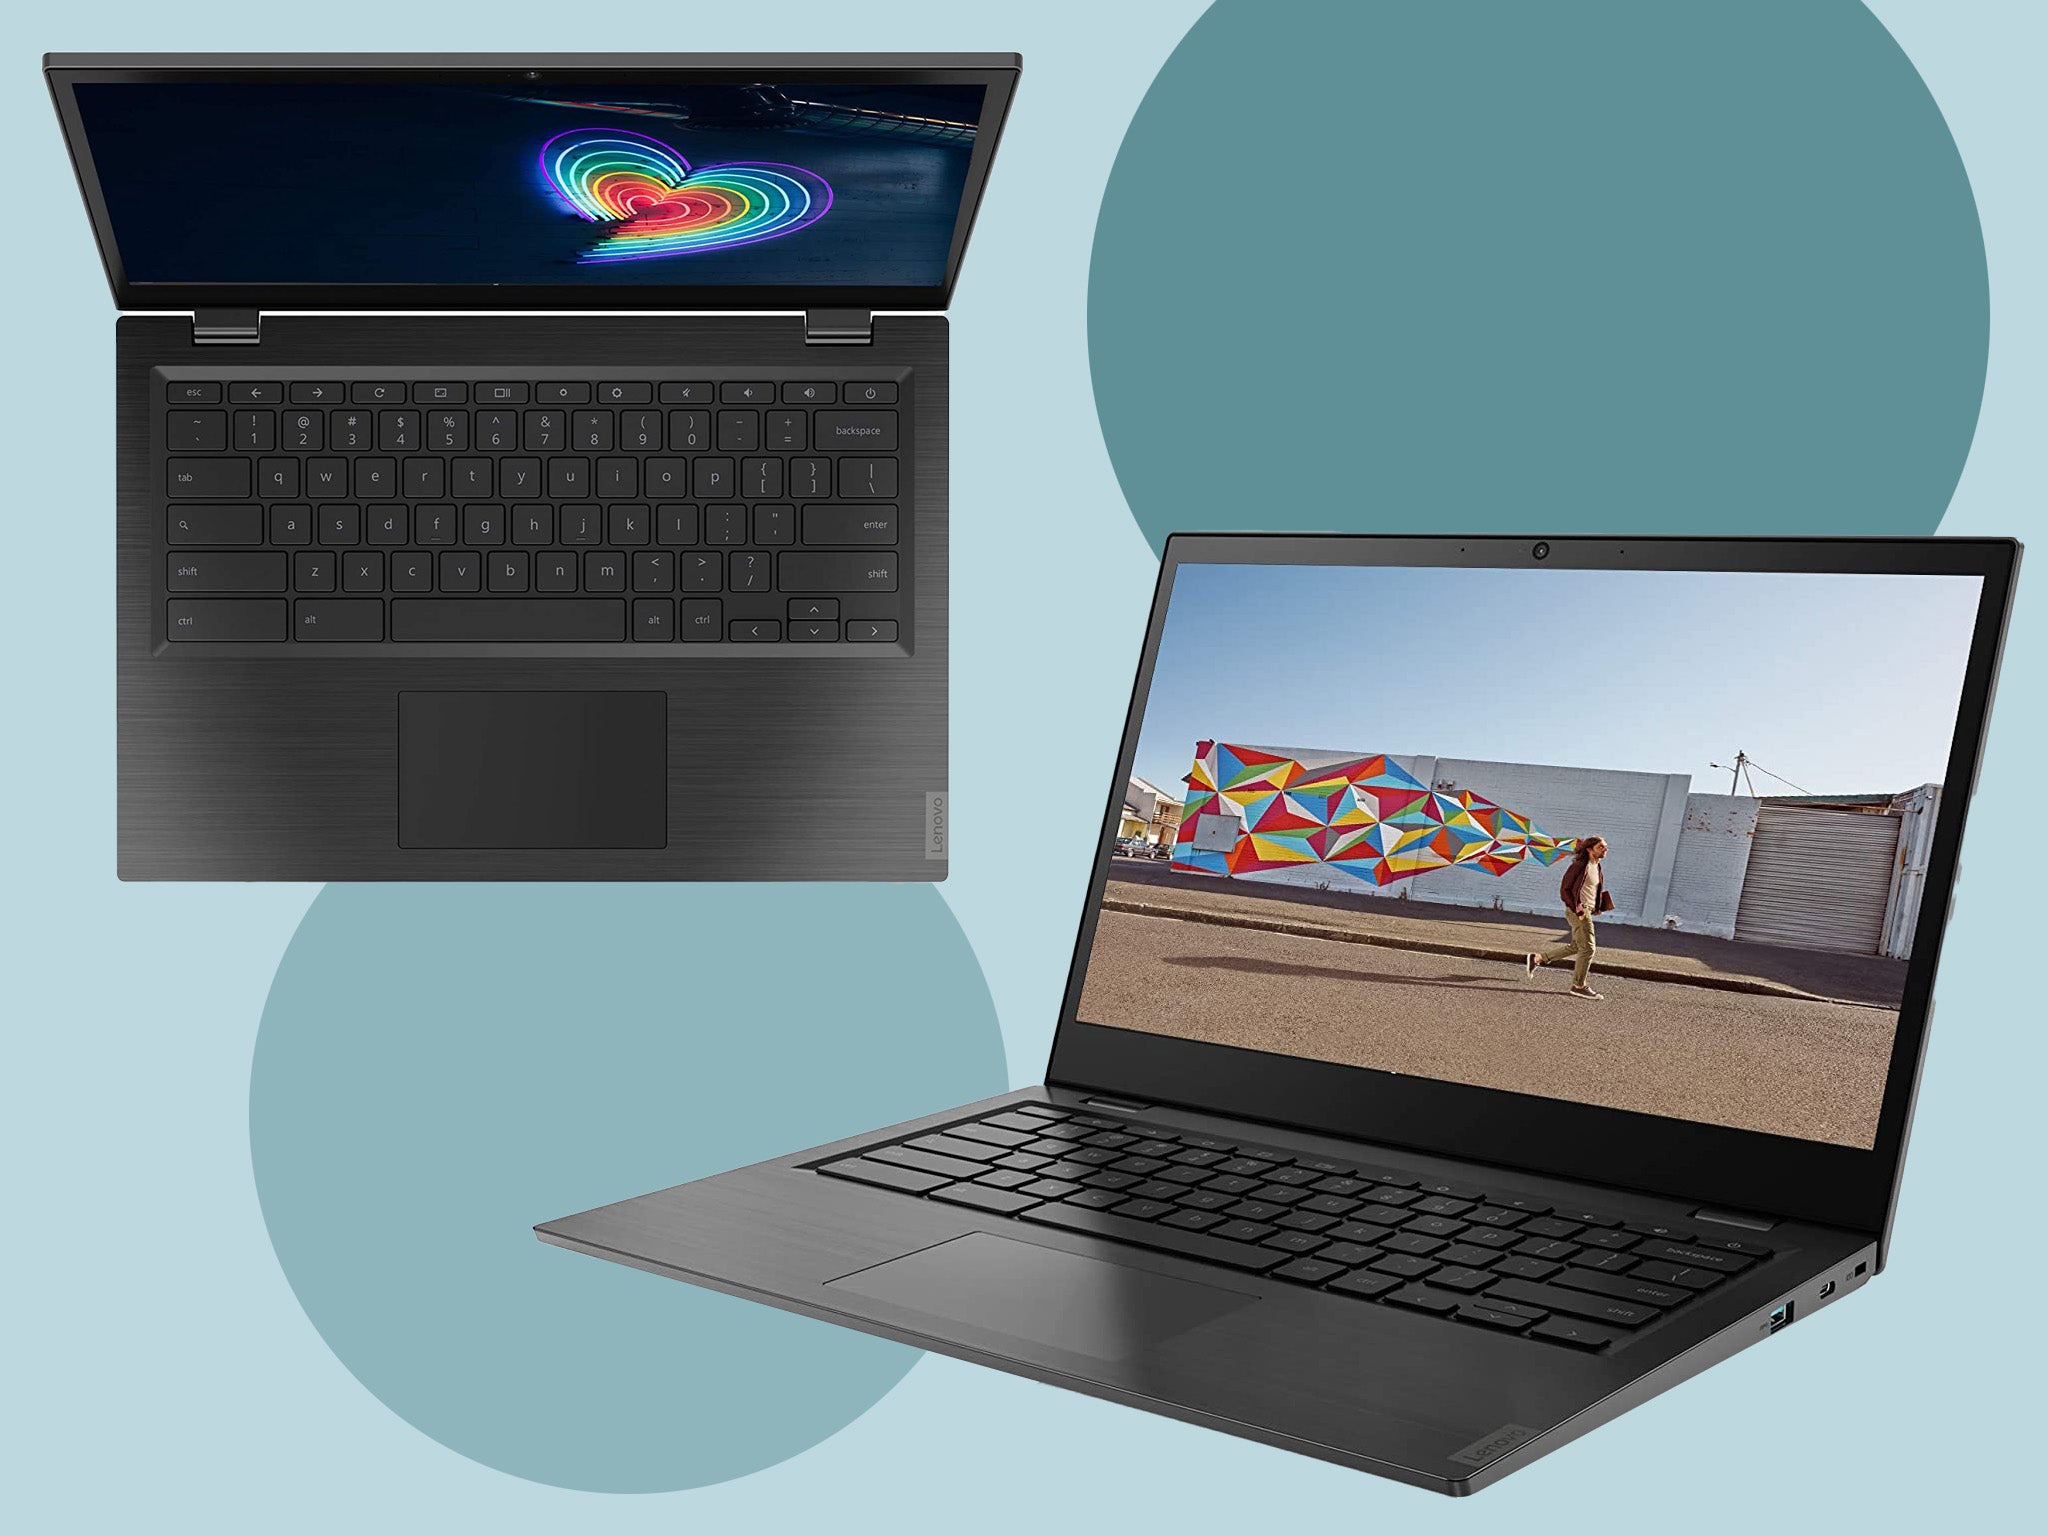 The laptop runs on the speedy and lightweight Chrome OS